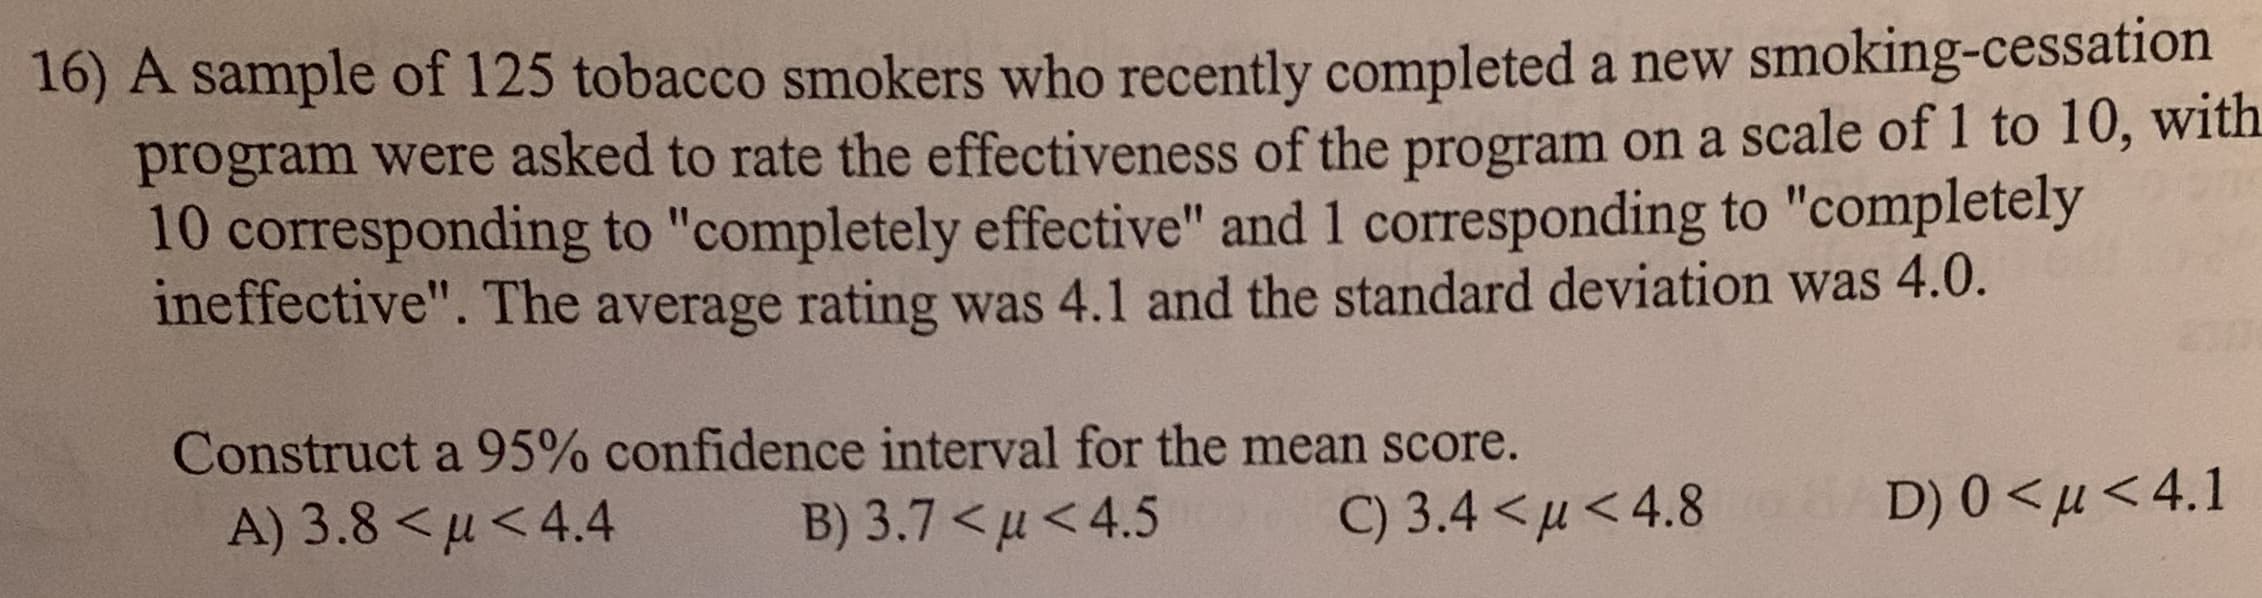 16) A sample of 125 tobacco smokers who recently completed a new smoking-cessation
program were asked to rate the effectiveness of the program on a scale of I to 10, with
10 corresponding to "completely effective" and 1 corresponding to "completely
ineffective". The average rating was 4.1 and the standard deviation was 4.0.
E37
Construct a 95% confidence interval for the mean score.
A) 3.8 < u<4.4
B) 3.7 <4.5
D) 0 u<4.1
C) 3.4 <u<4.8
